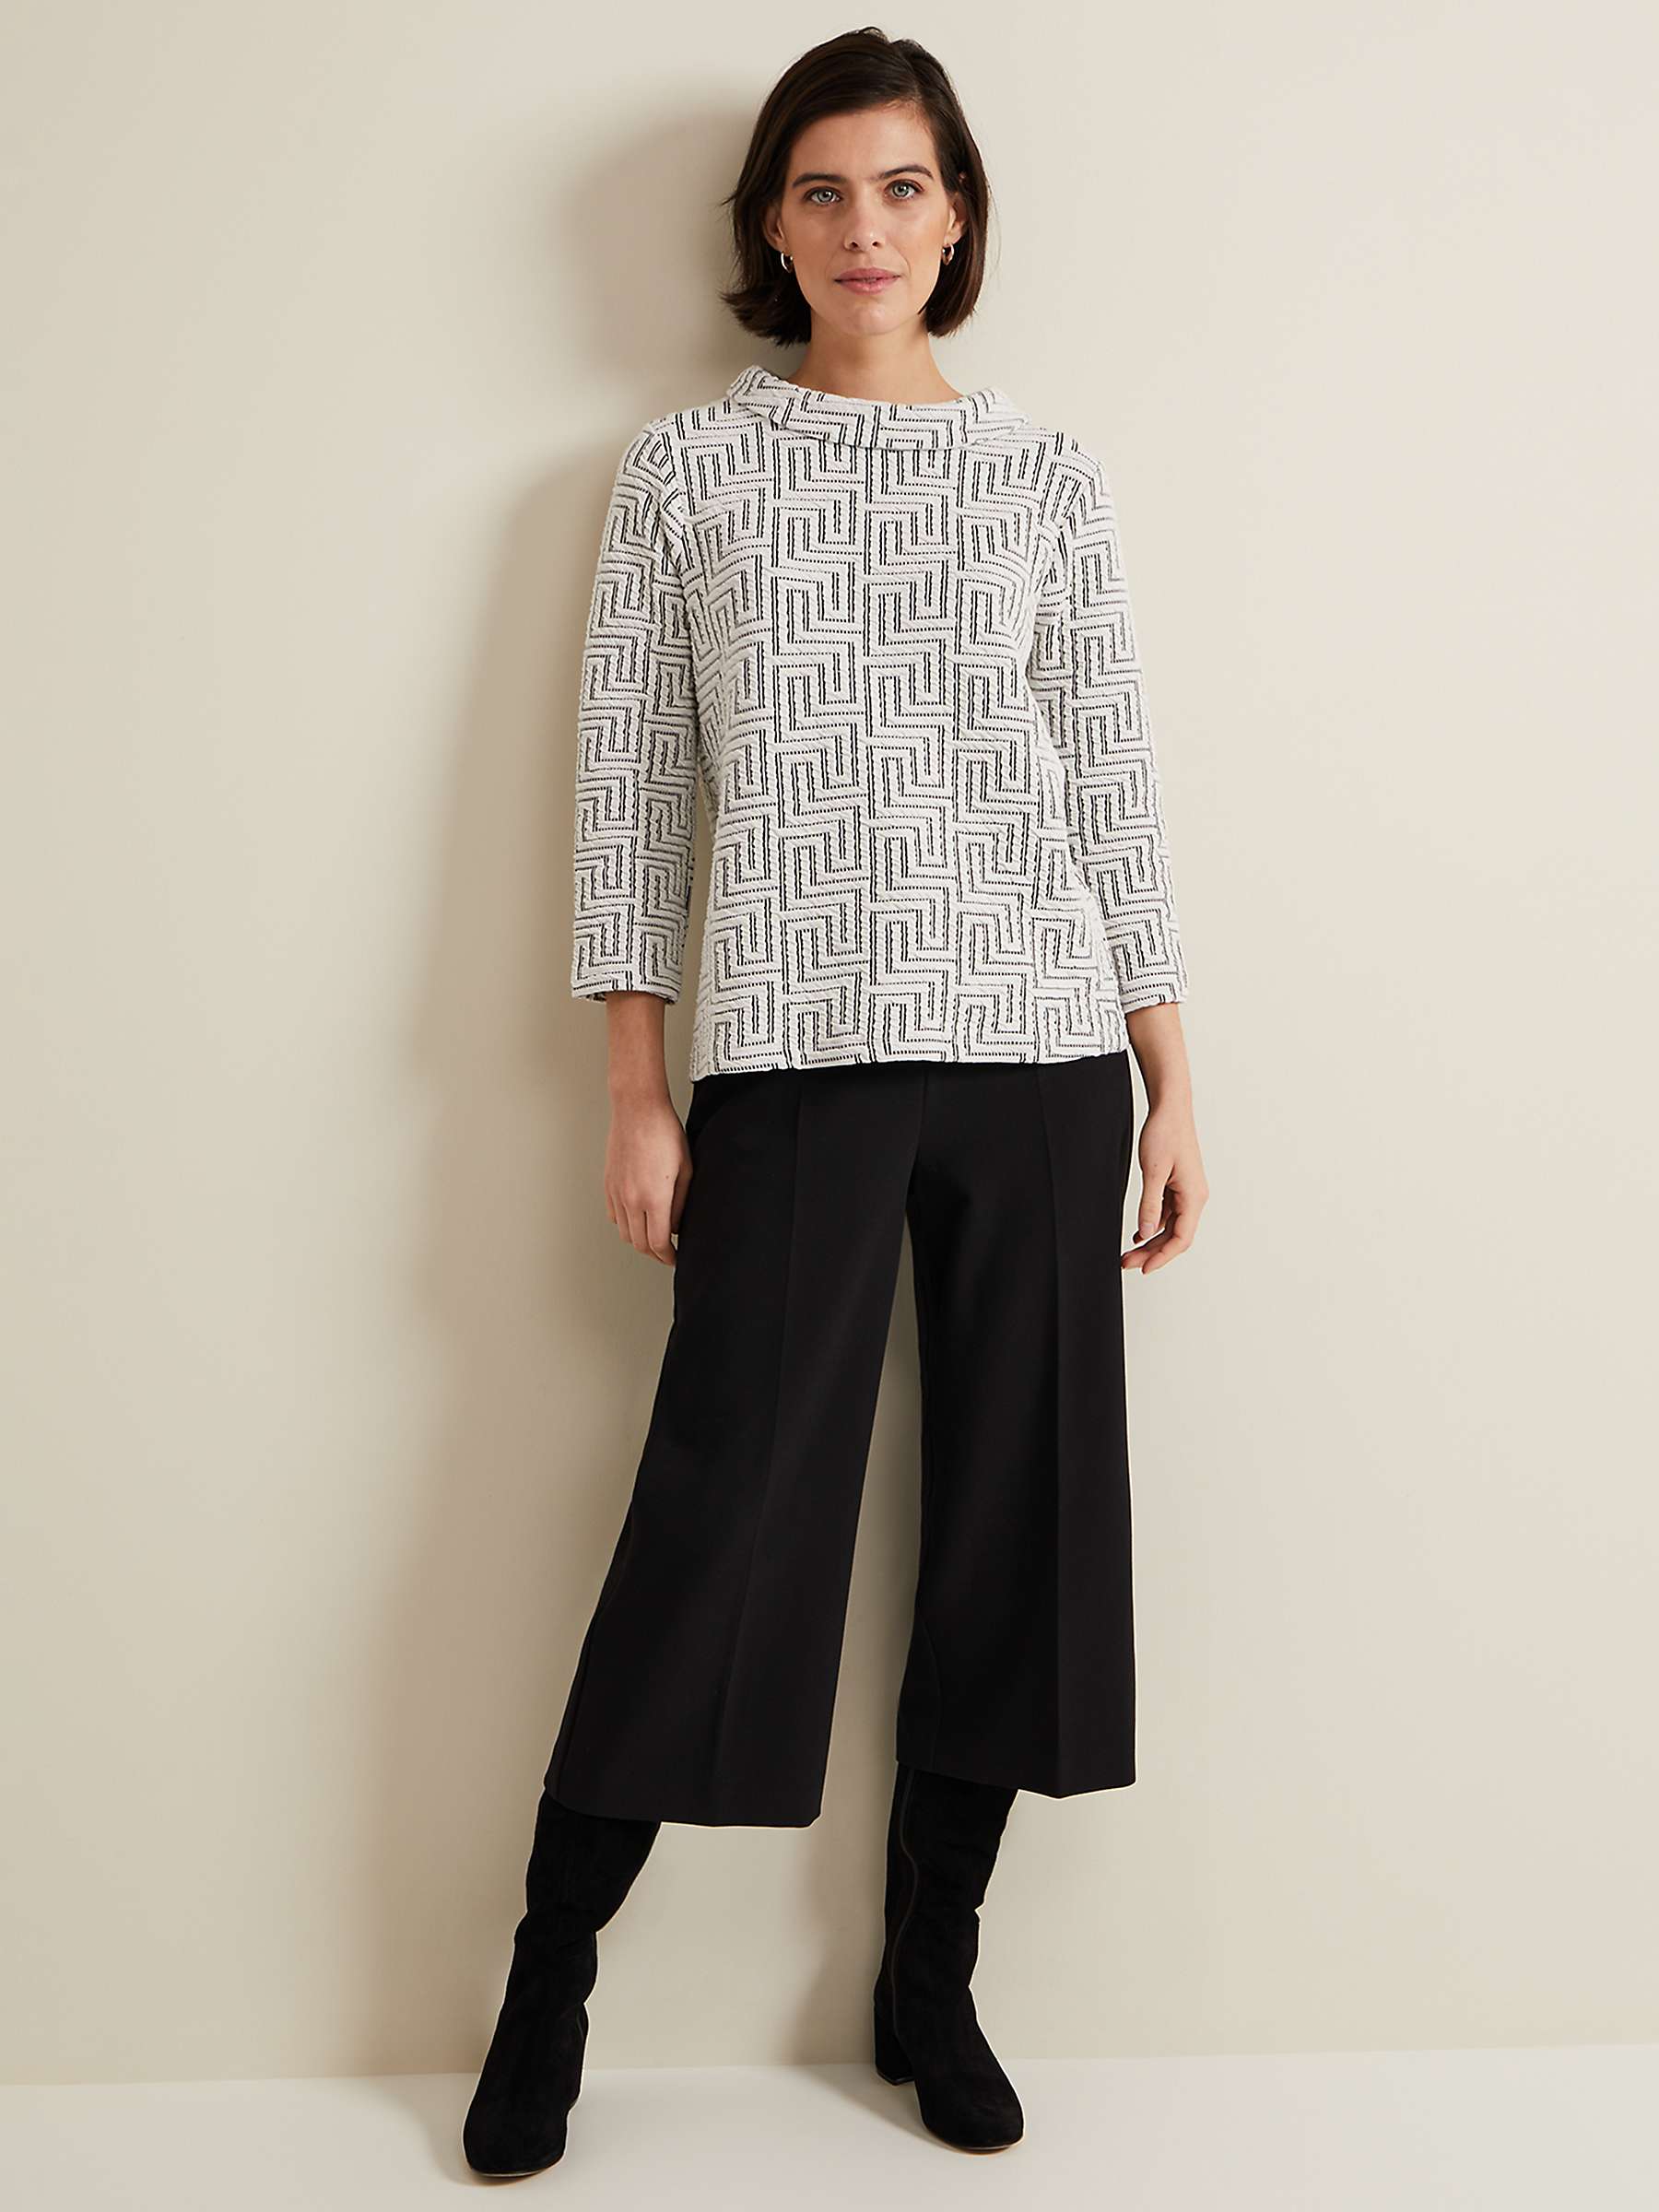 Buy Phase Eight Rena Textured Top, Ivory/Black Online at johnlewis.com